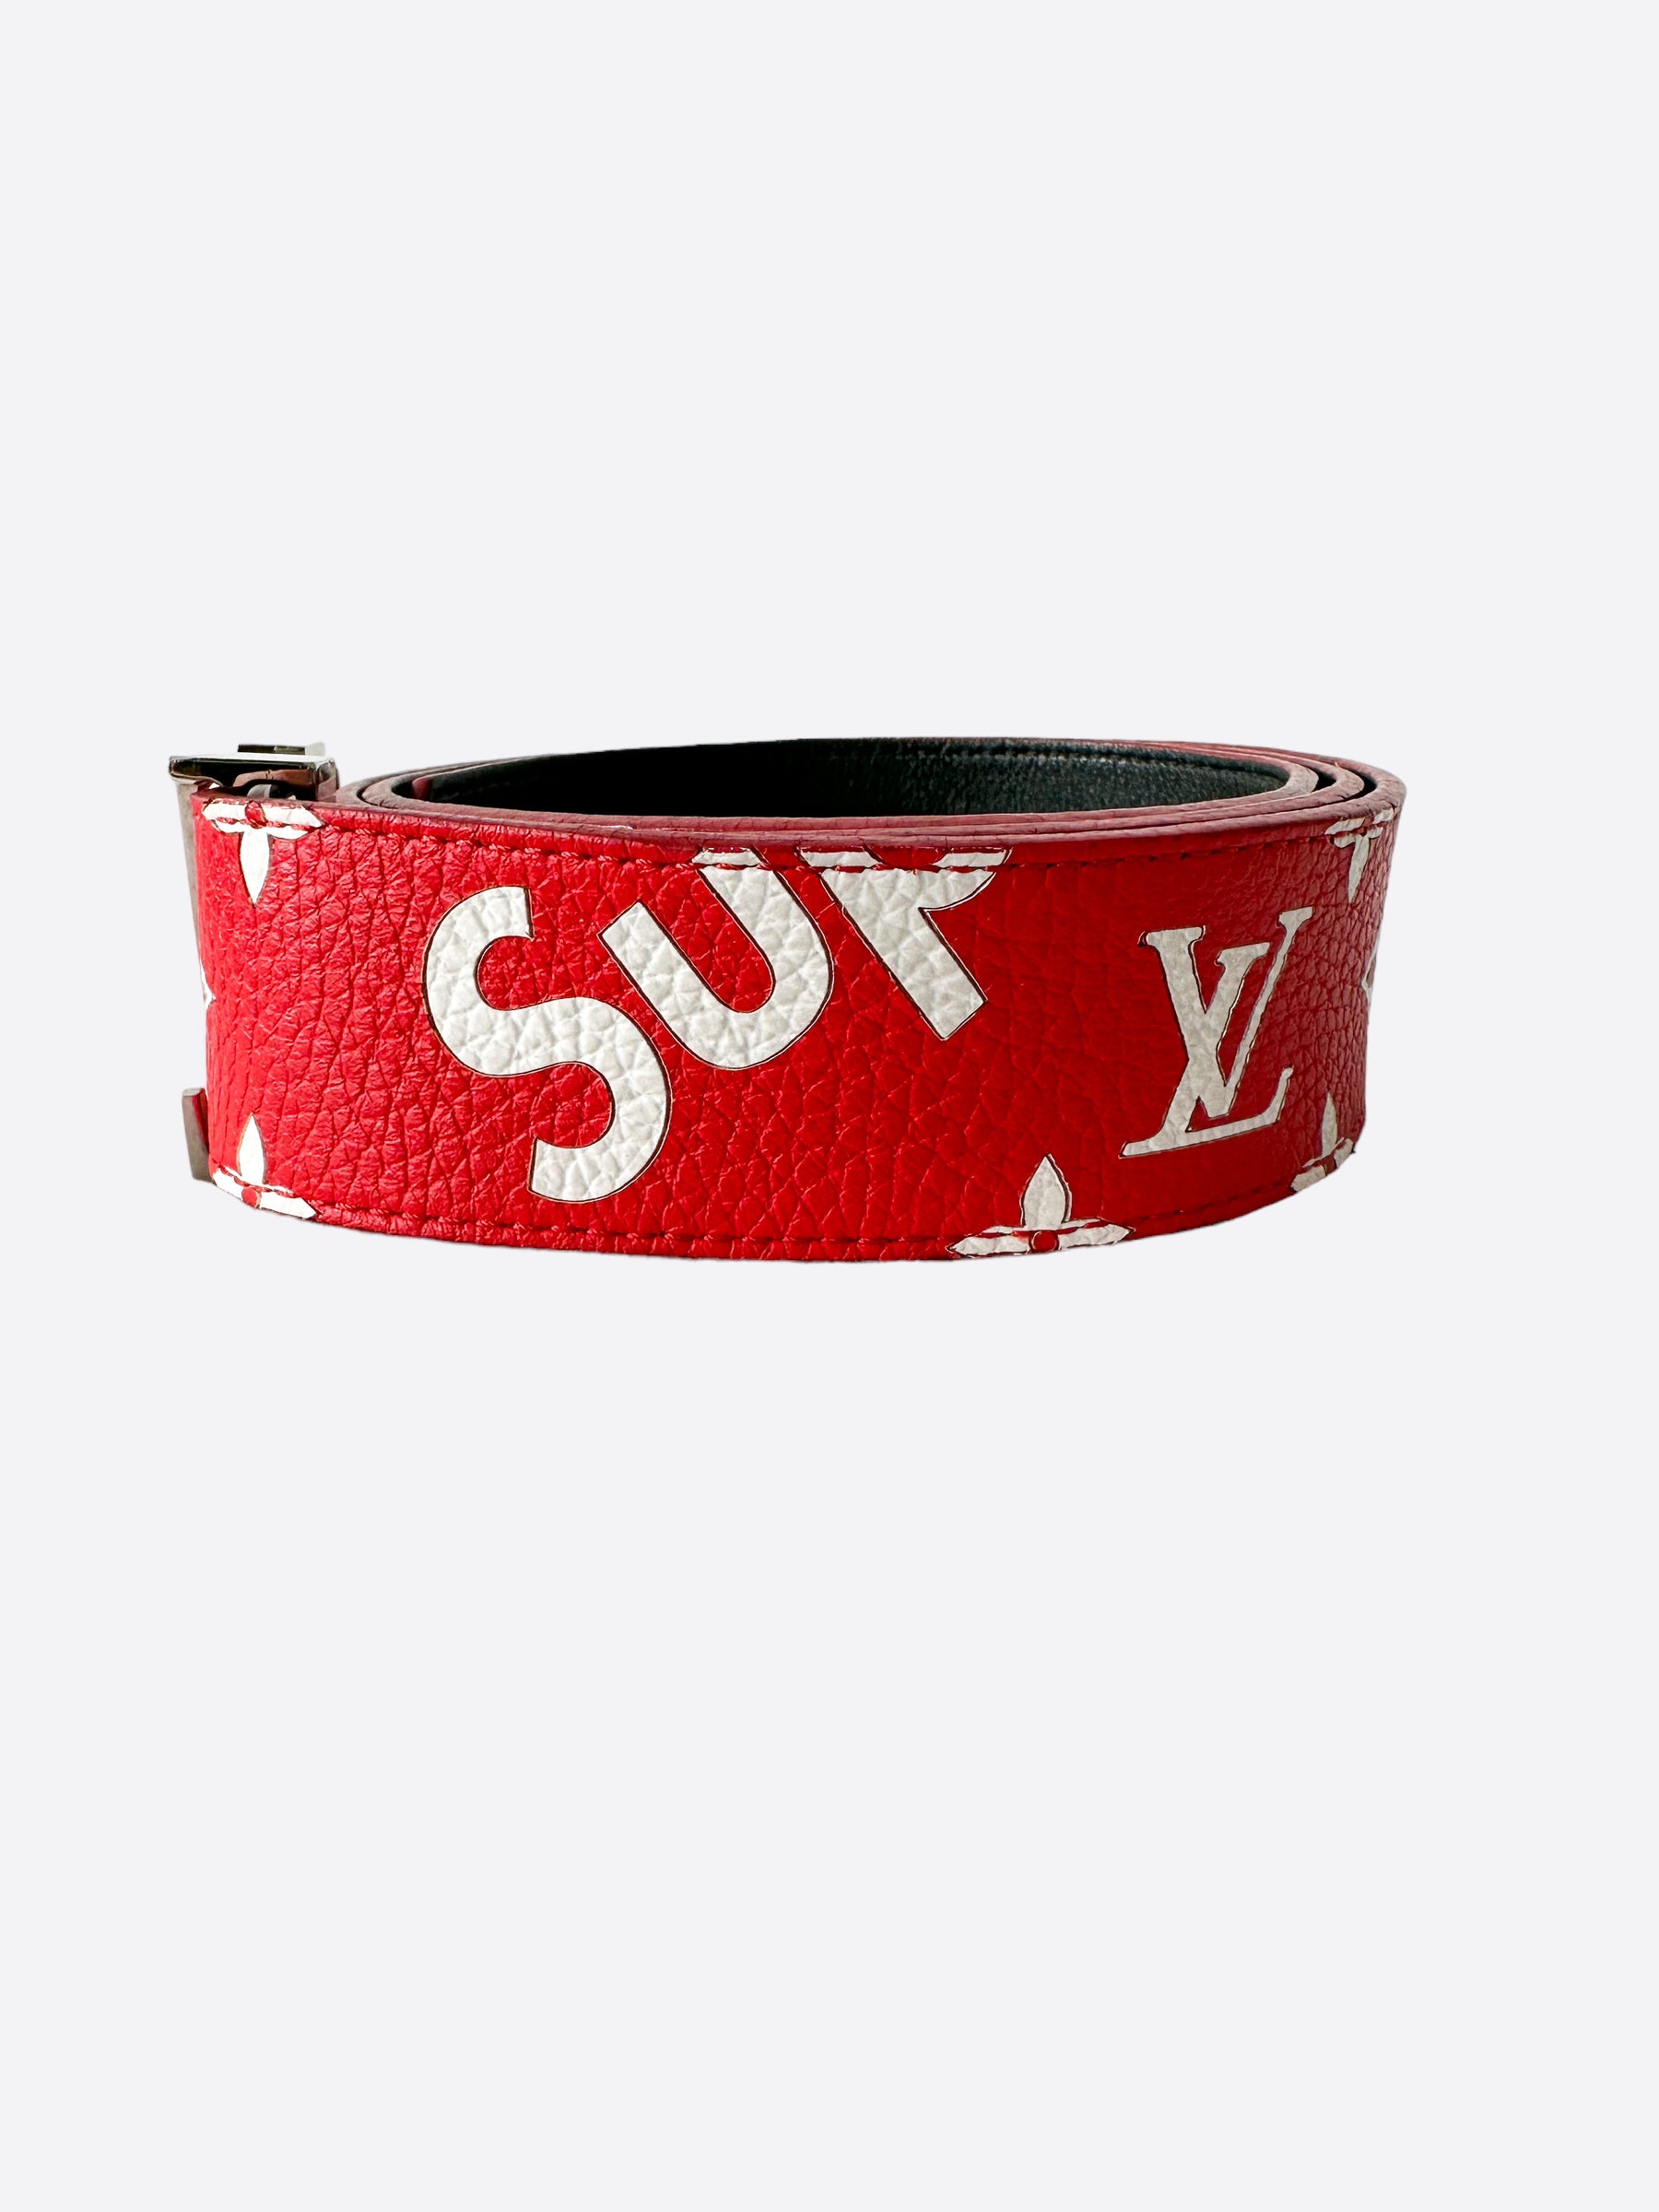 Louis Vuitton x Supreme Red Leather Belt